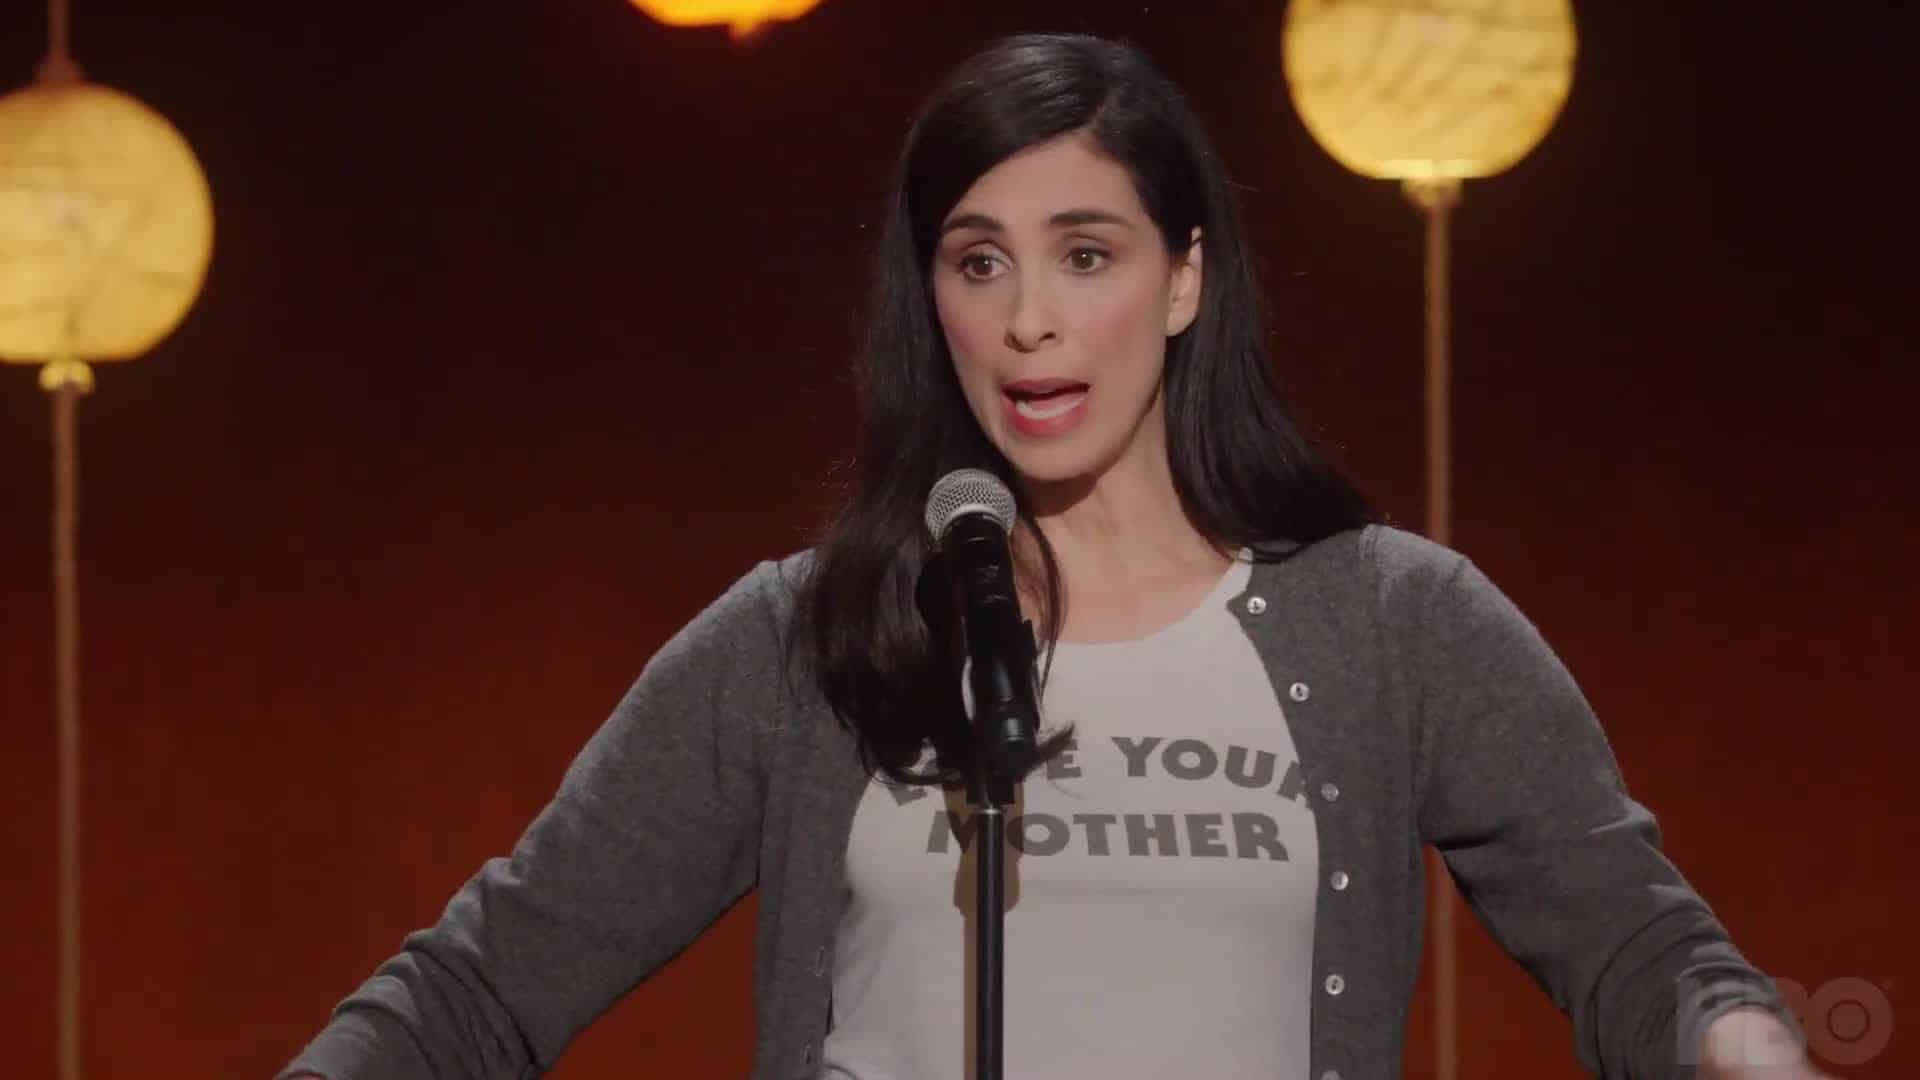 Sarah Silverman in a stand-up comedy performance